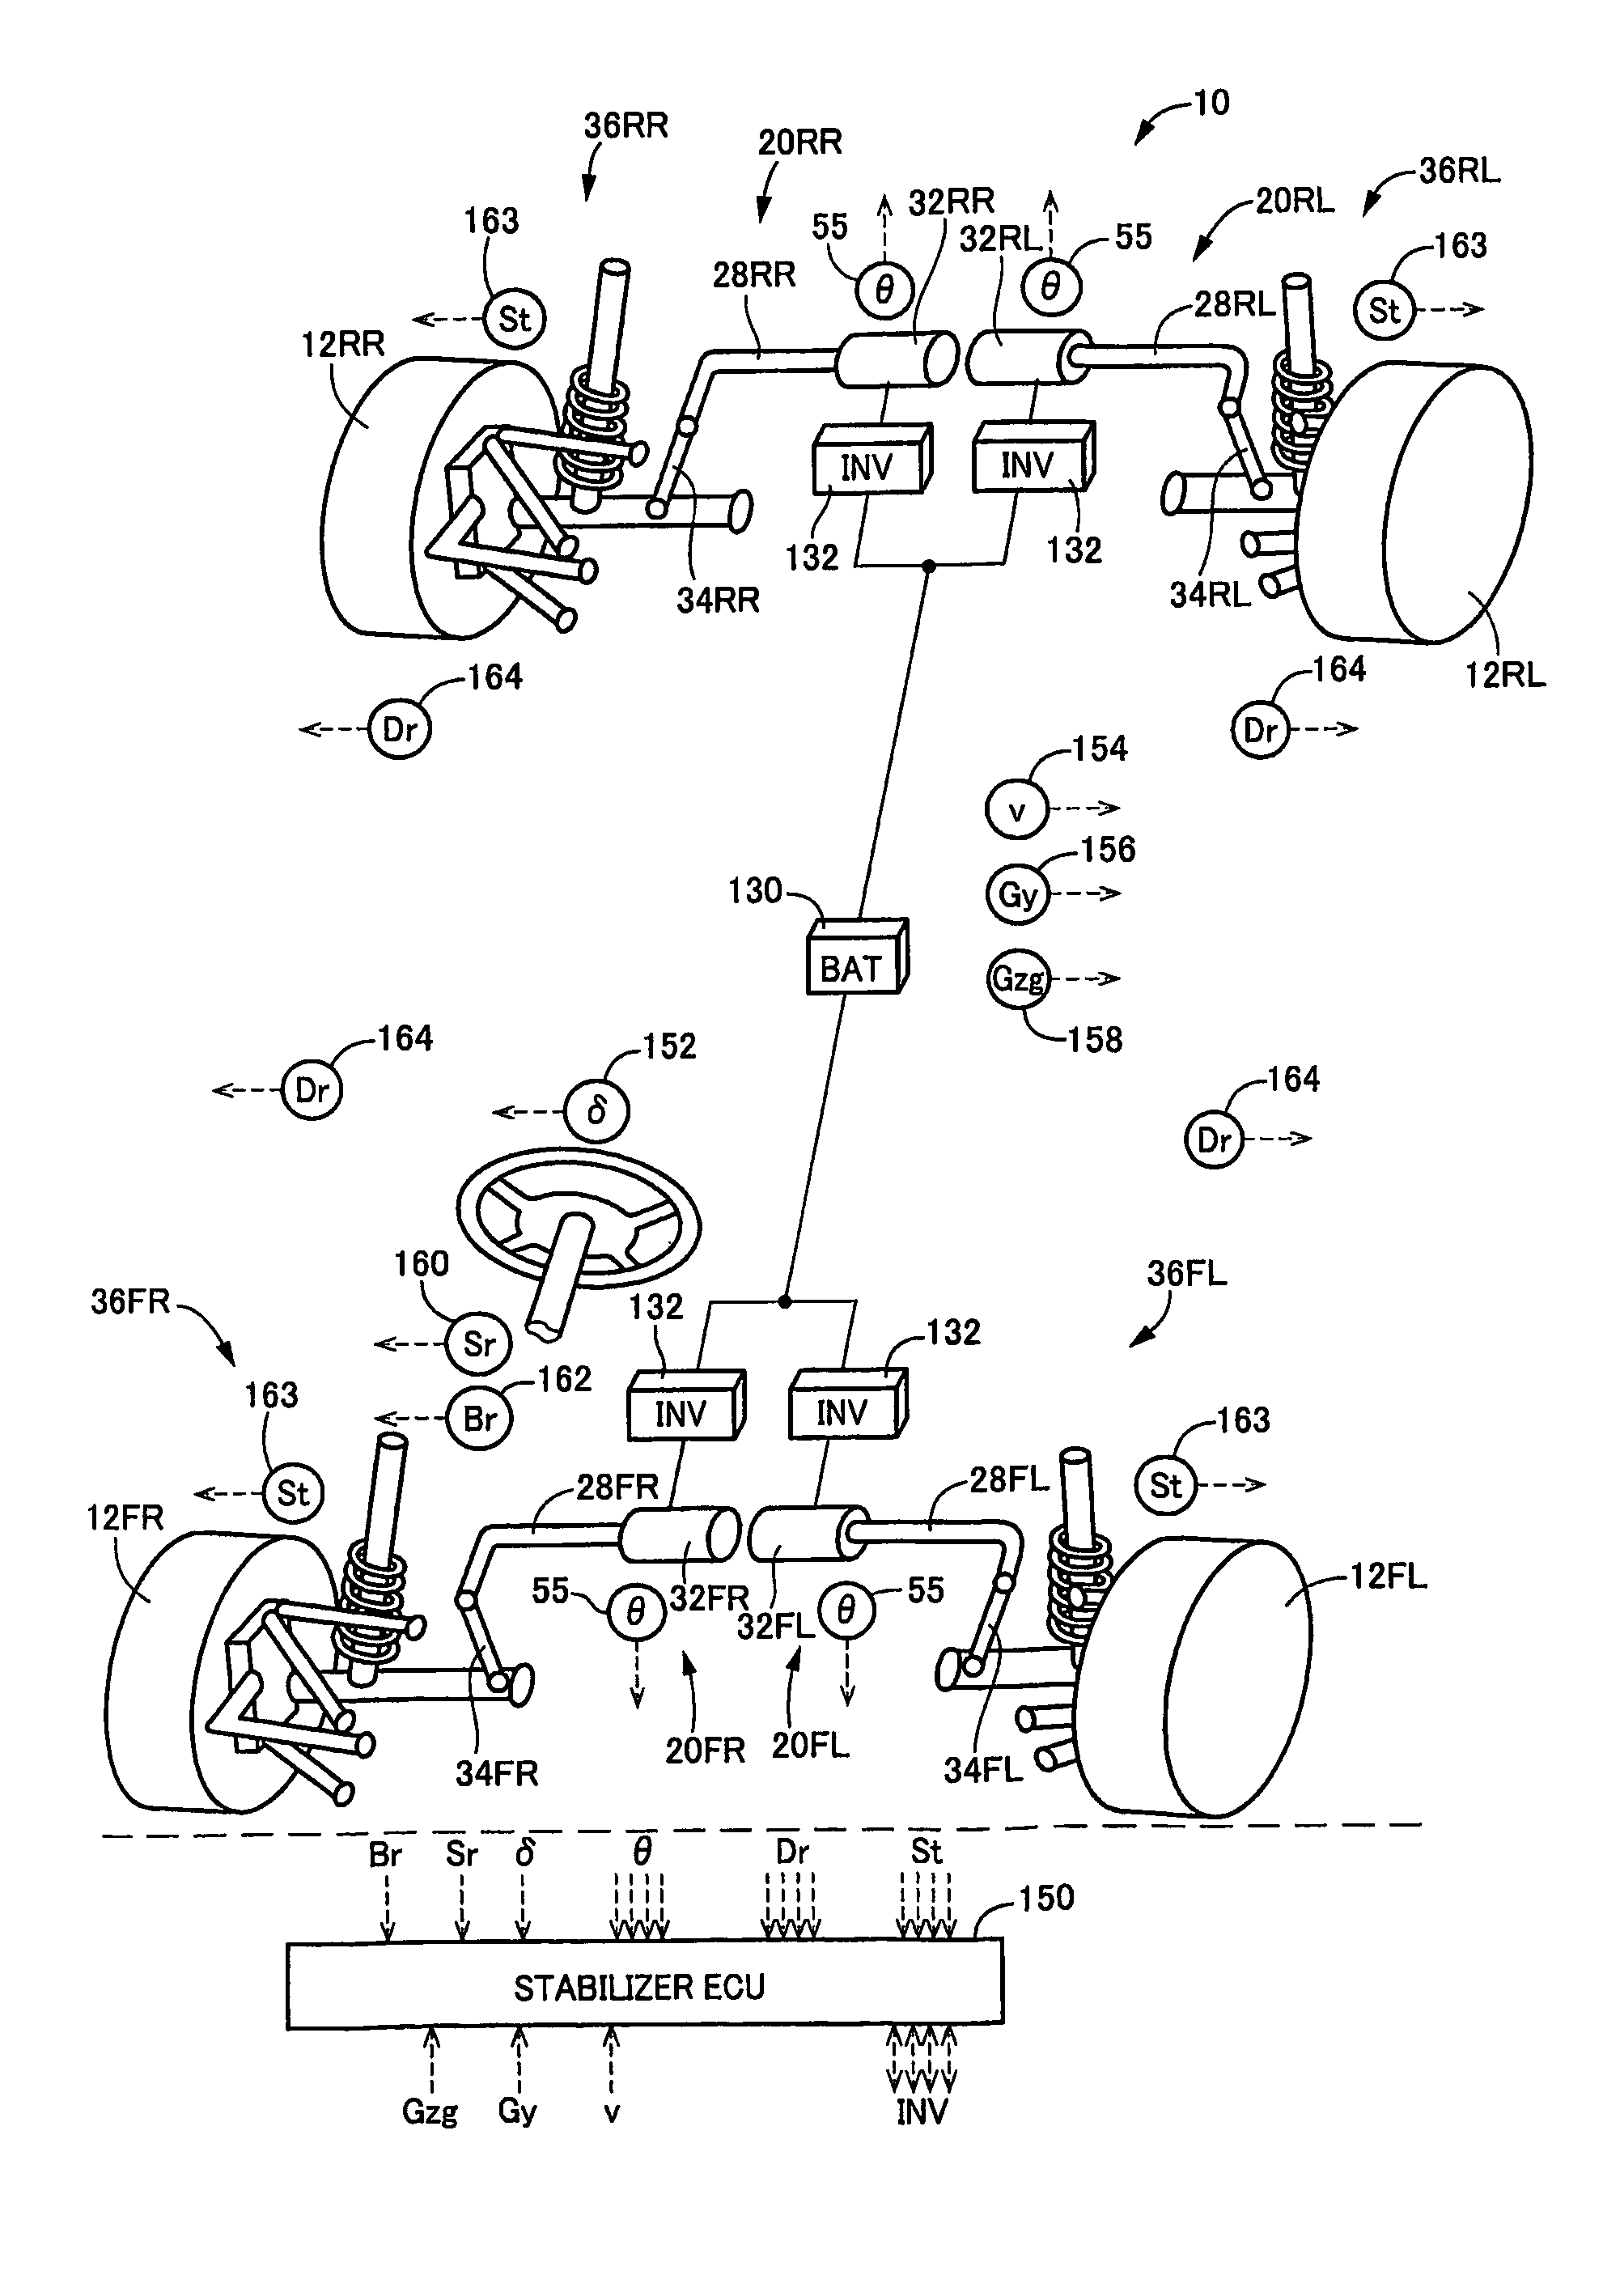 Vehicle stabilizer system